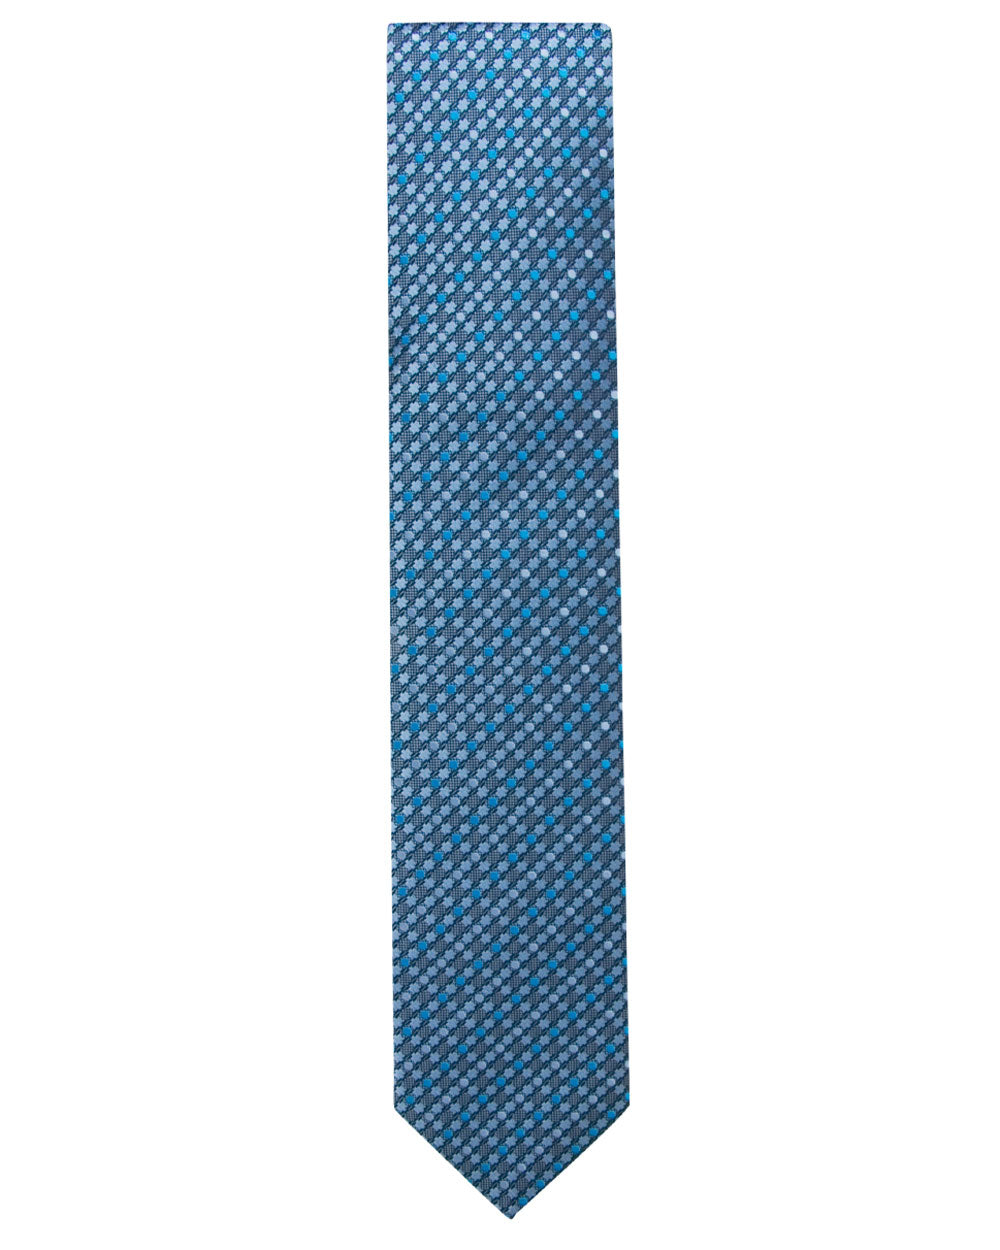 Navy and Blue Dotted Tie